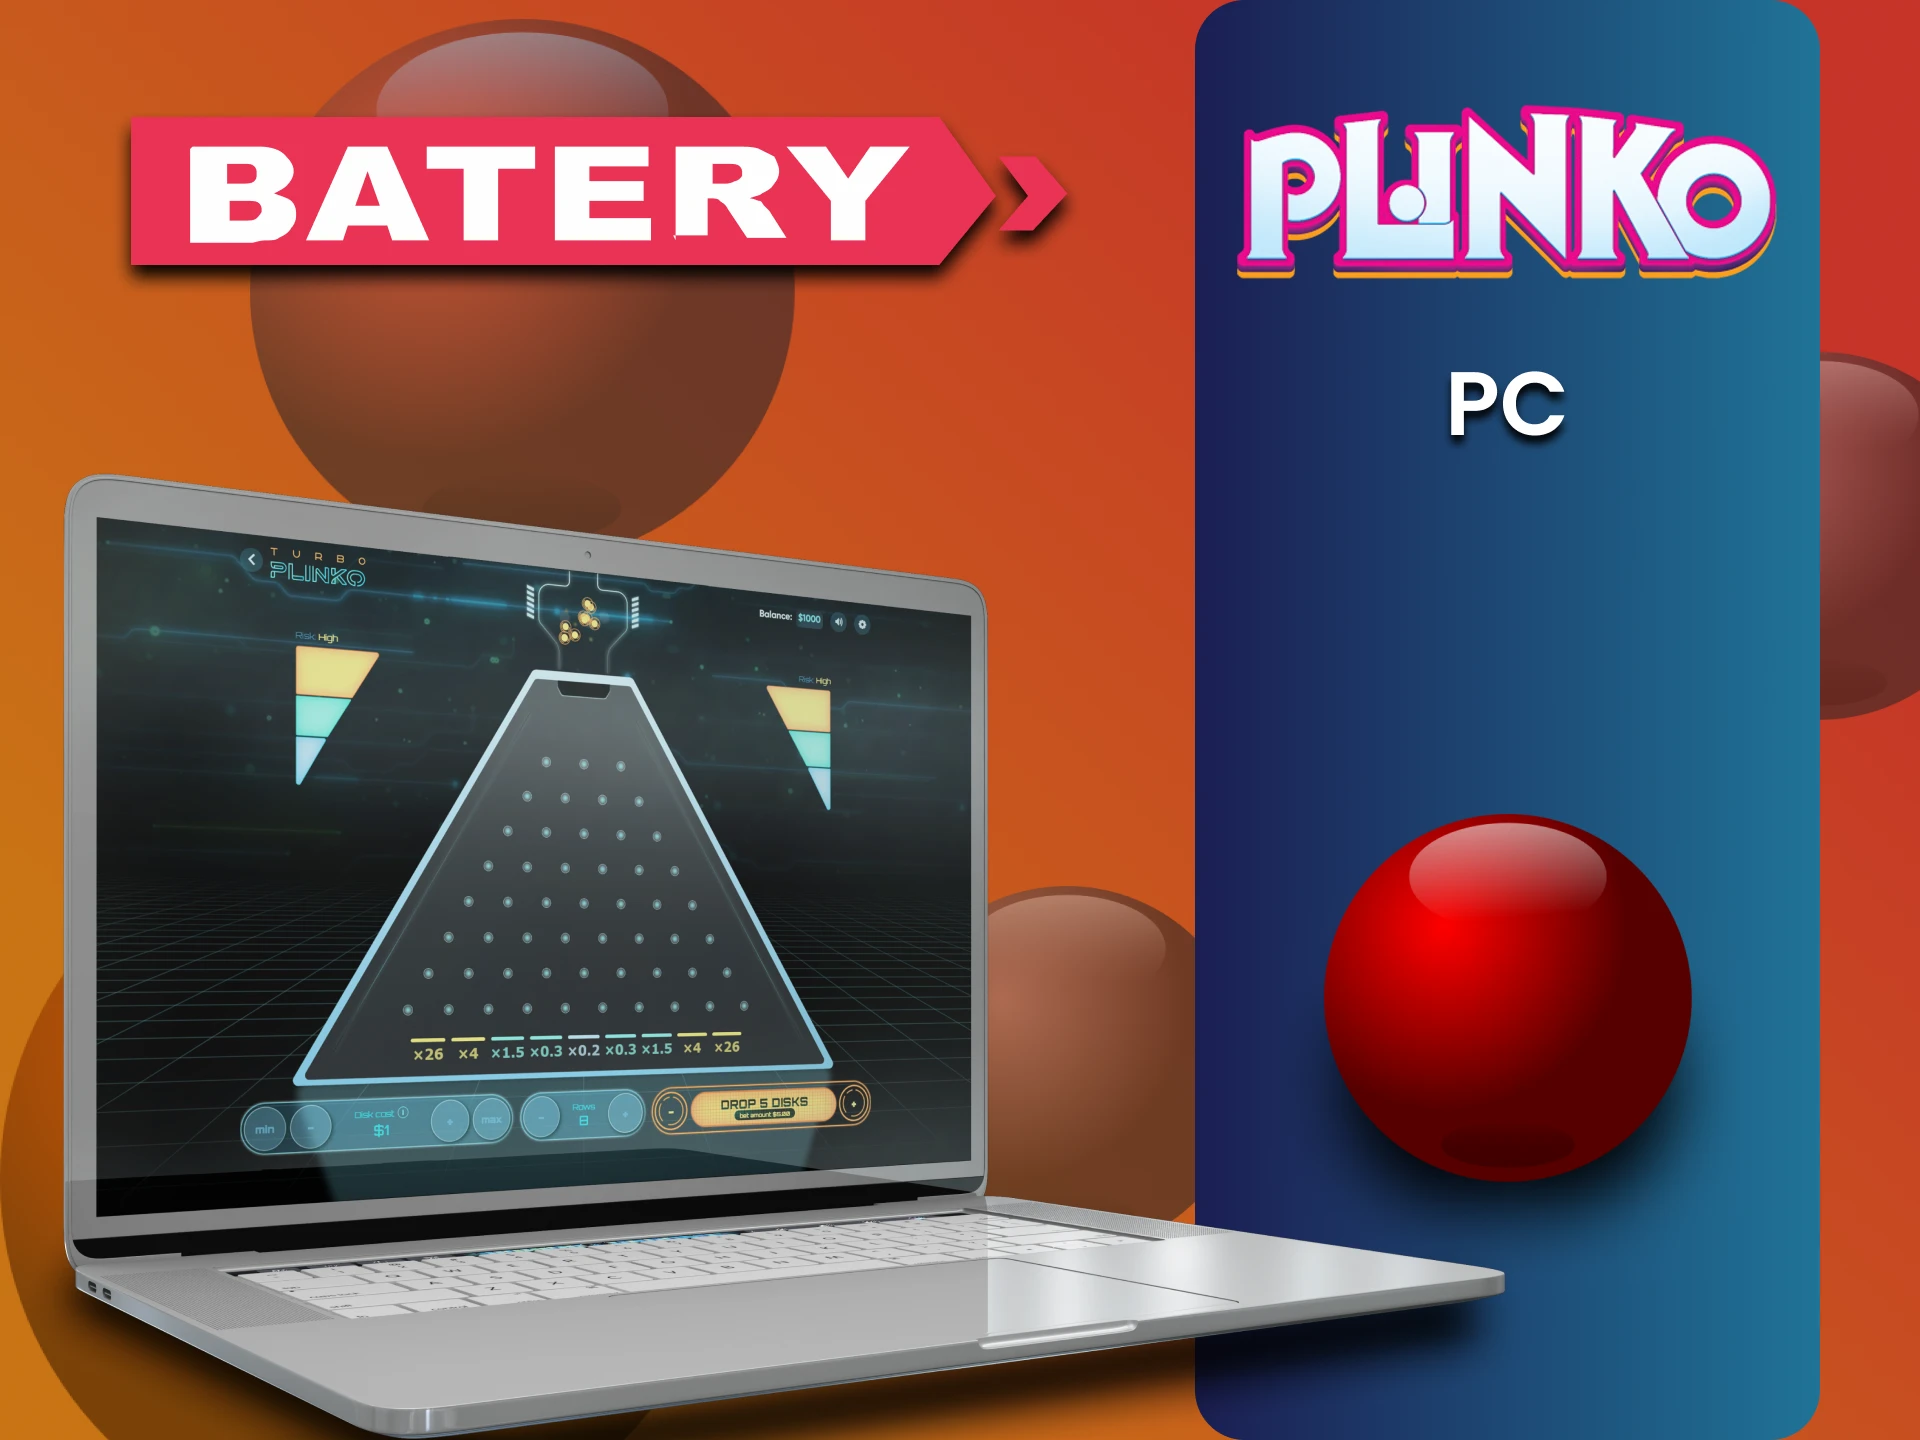 You can play Plinko via PC on the Batery website.